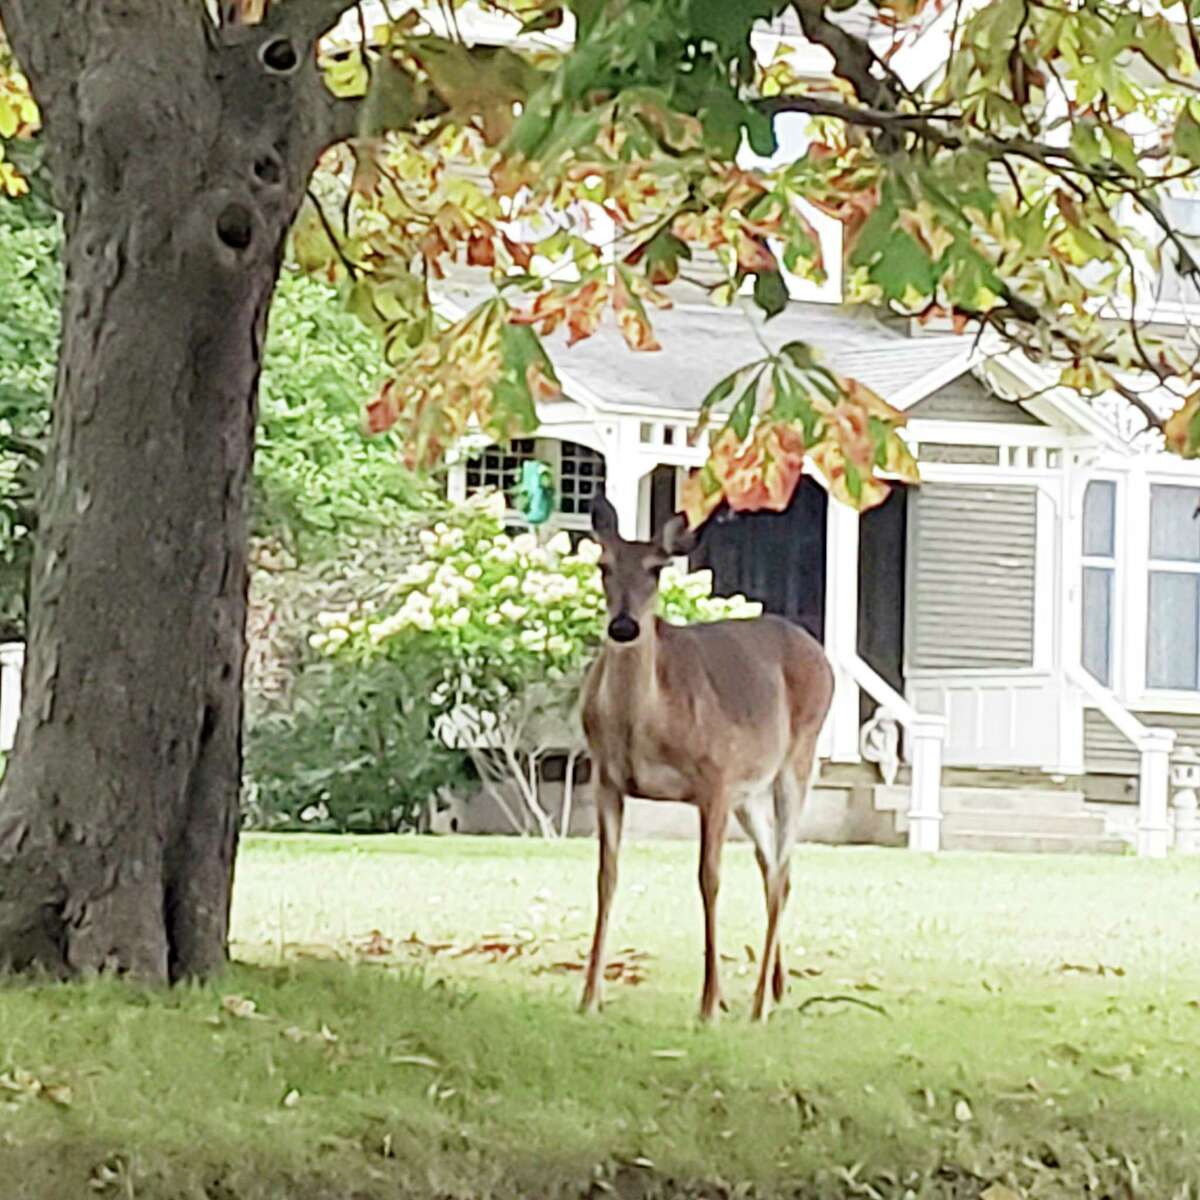 At a meeting in November, Manistee City Council rejected a request for a 2021 deer cull when the mayor read the request at the meeting and no councilmembers made a motion in support of it -- meaning the request failed for lack of support. The measure is on the agenda again as unfinished business for the Jan. 5 meeting. (File photo)